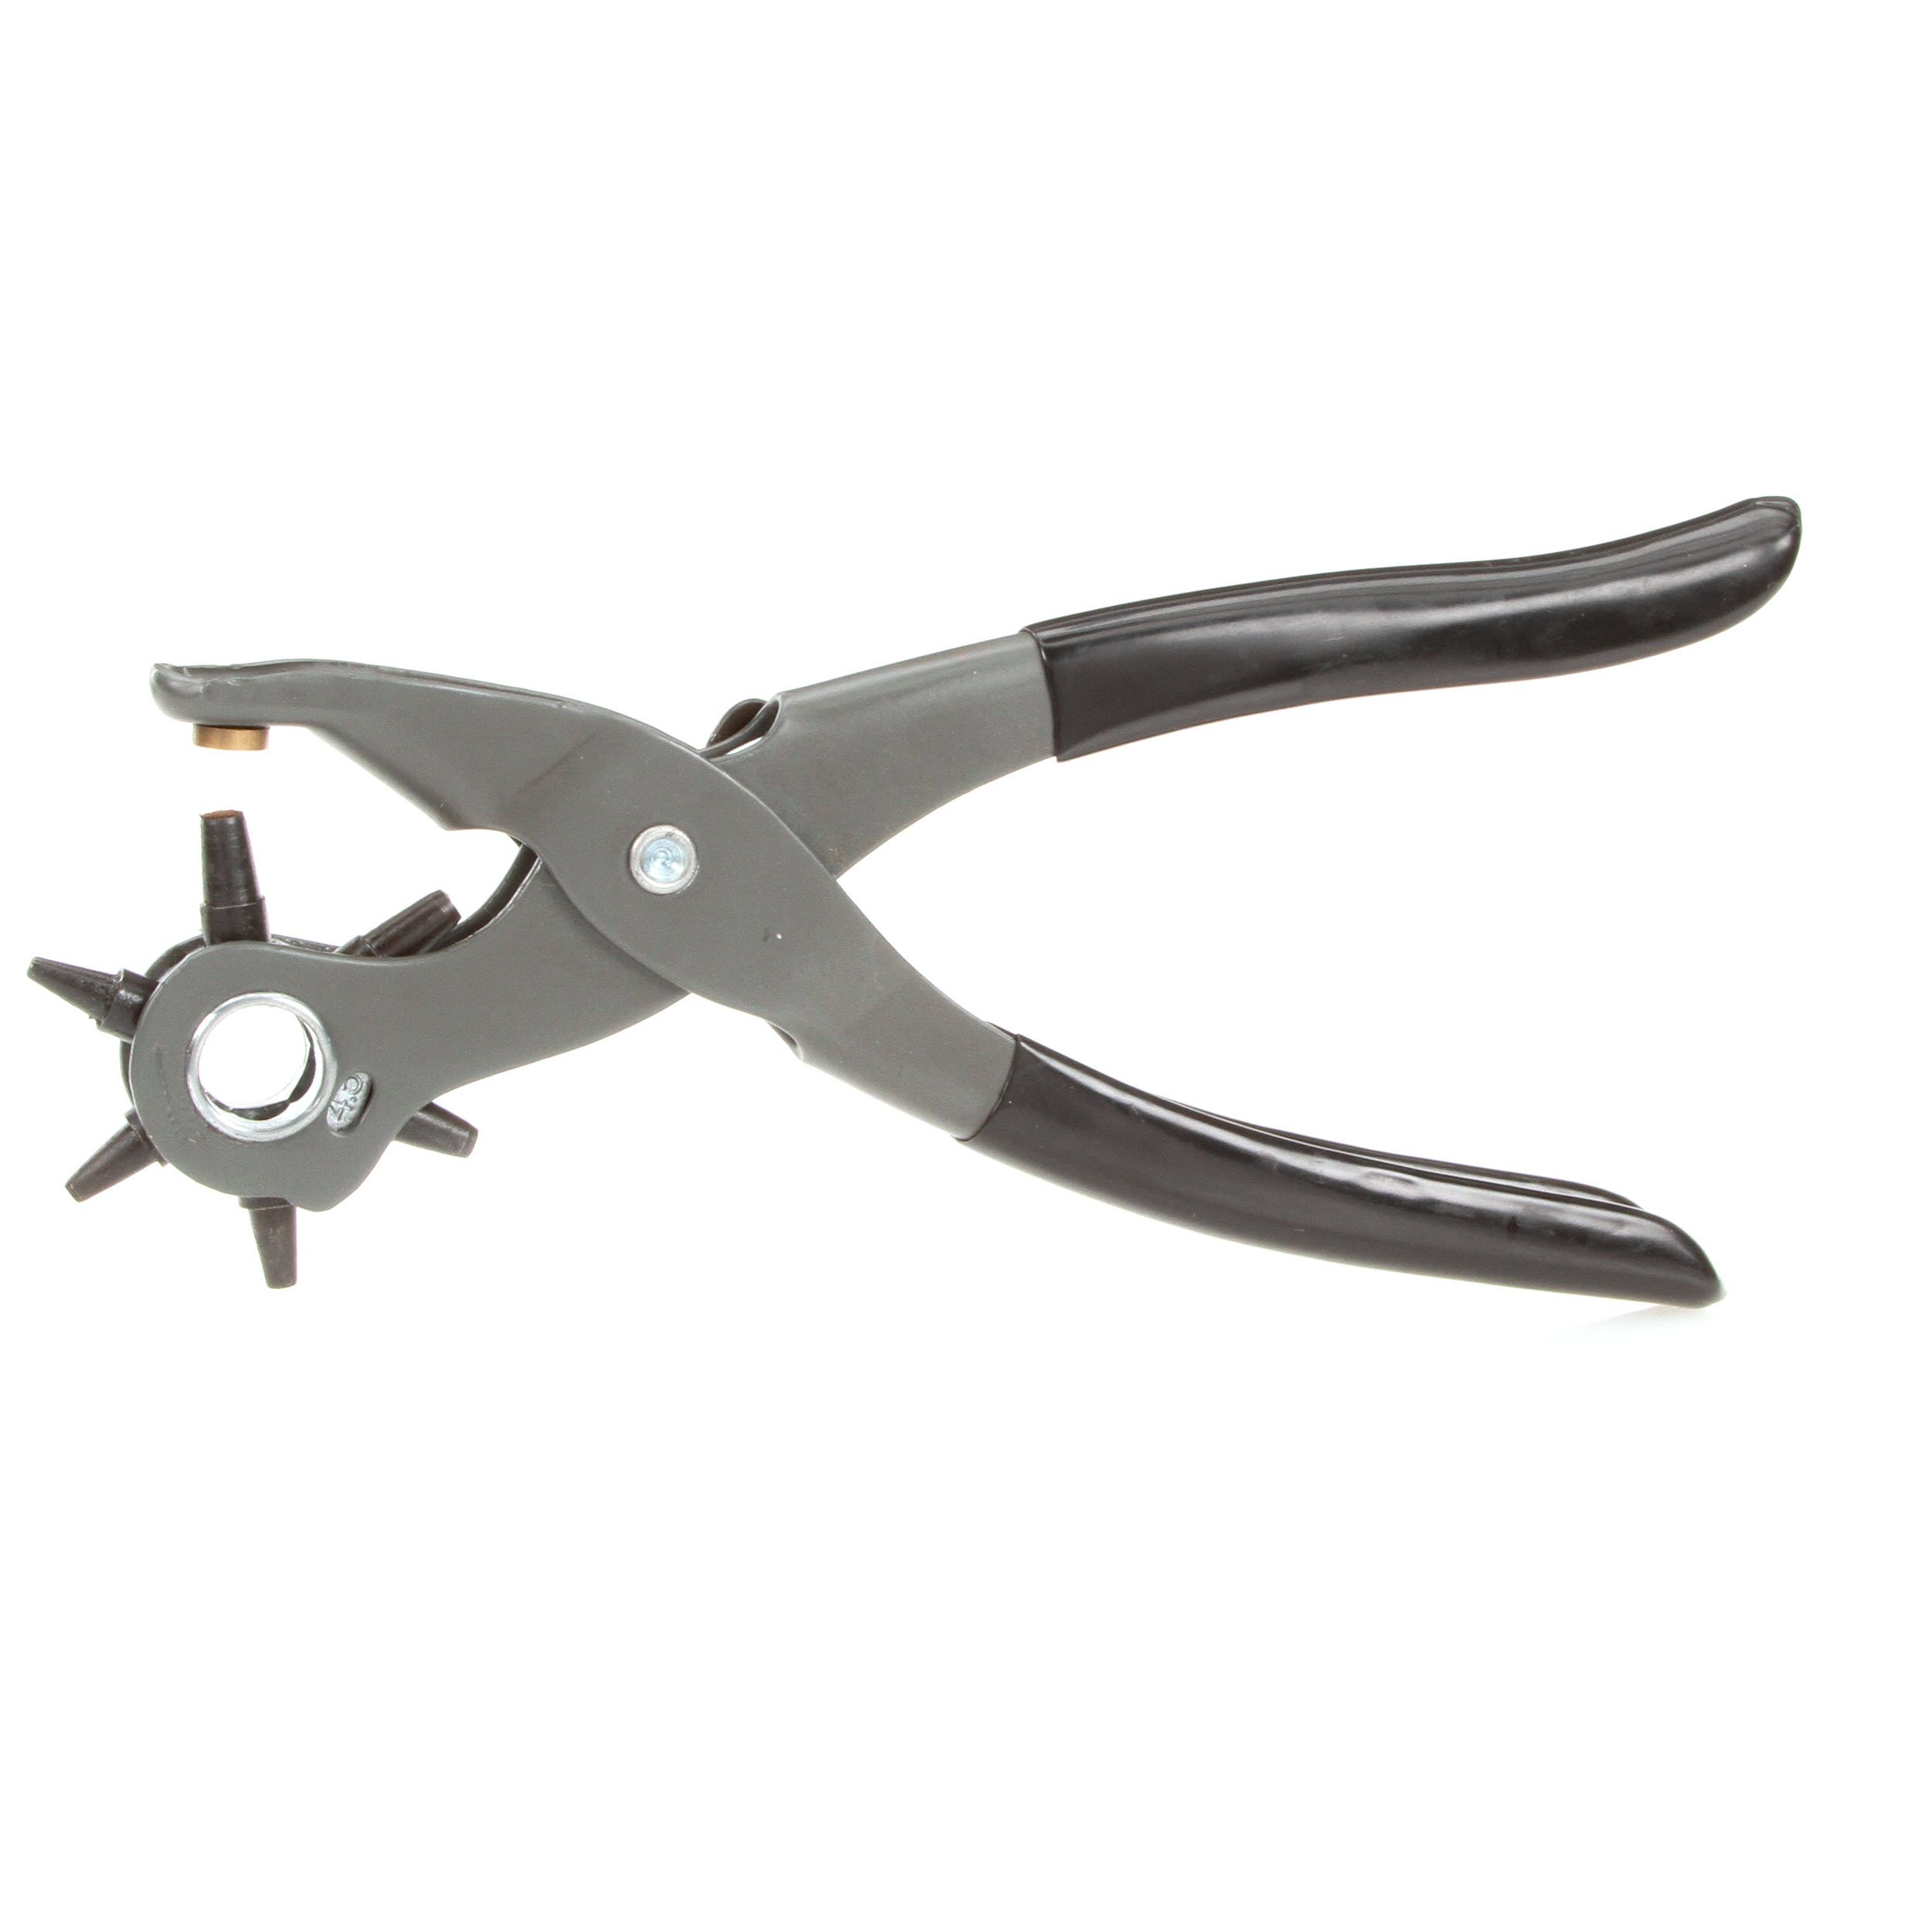 Pliers Punch Set for Leather Leather Plastic 9 Pieces 2,5 10 MM 